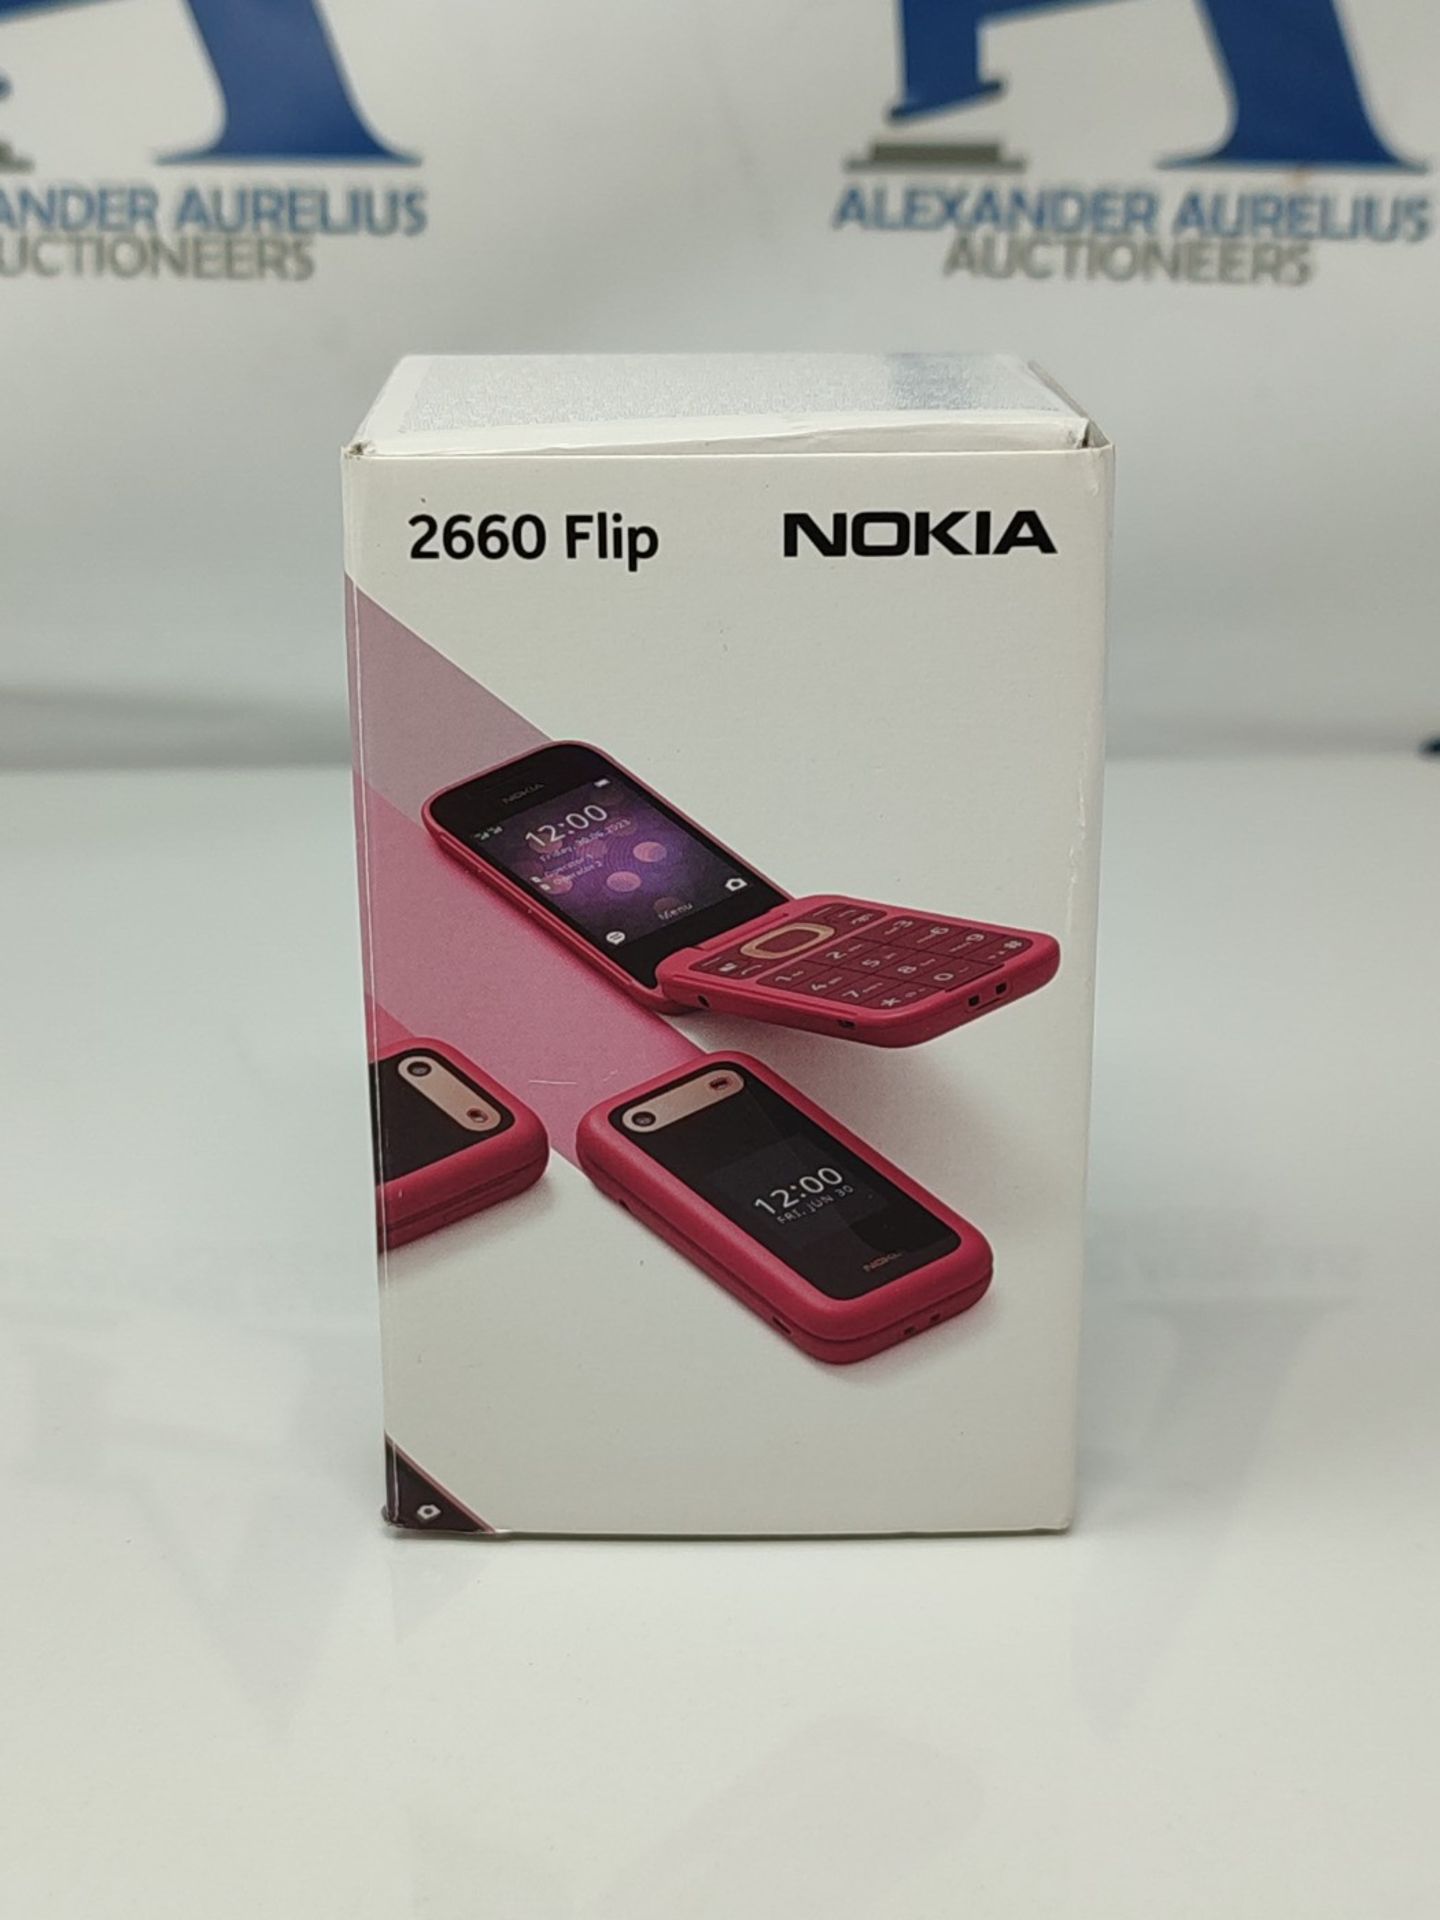 Nokia 2660 Flip Feature Phone with 2.8" display, 4G Connectivity, built-in camera, MP3 - Image 2 of 3